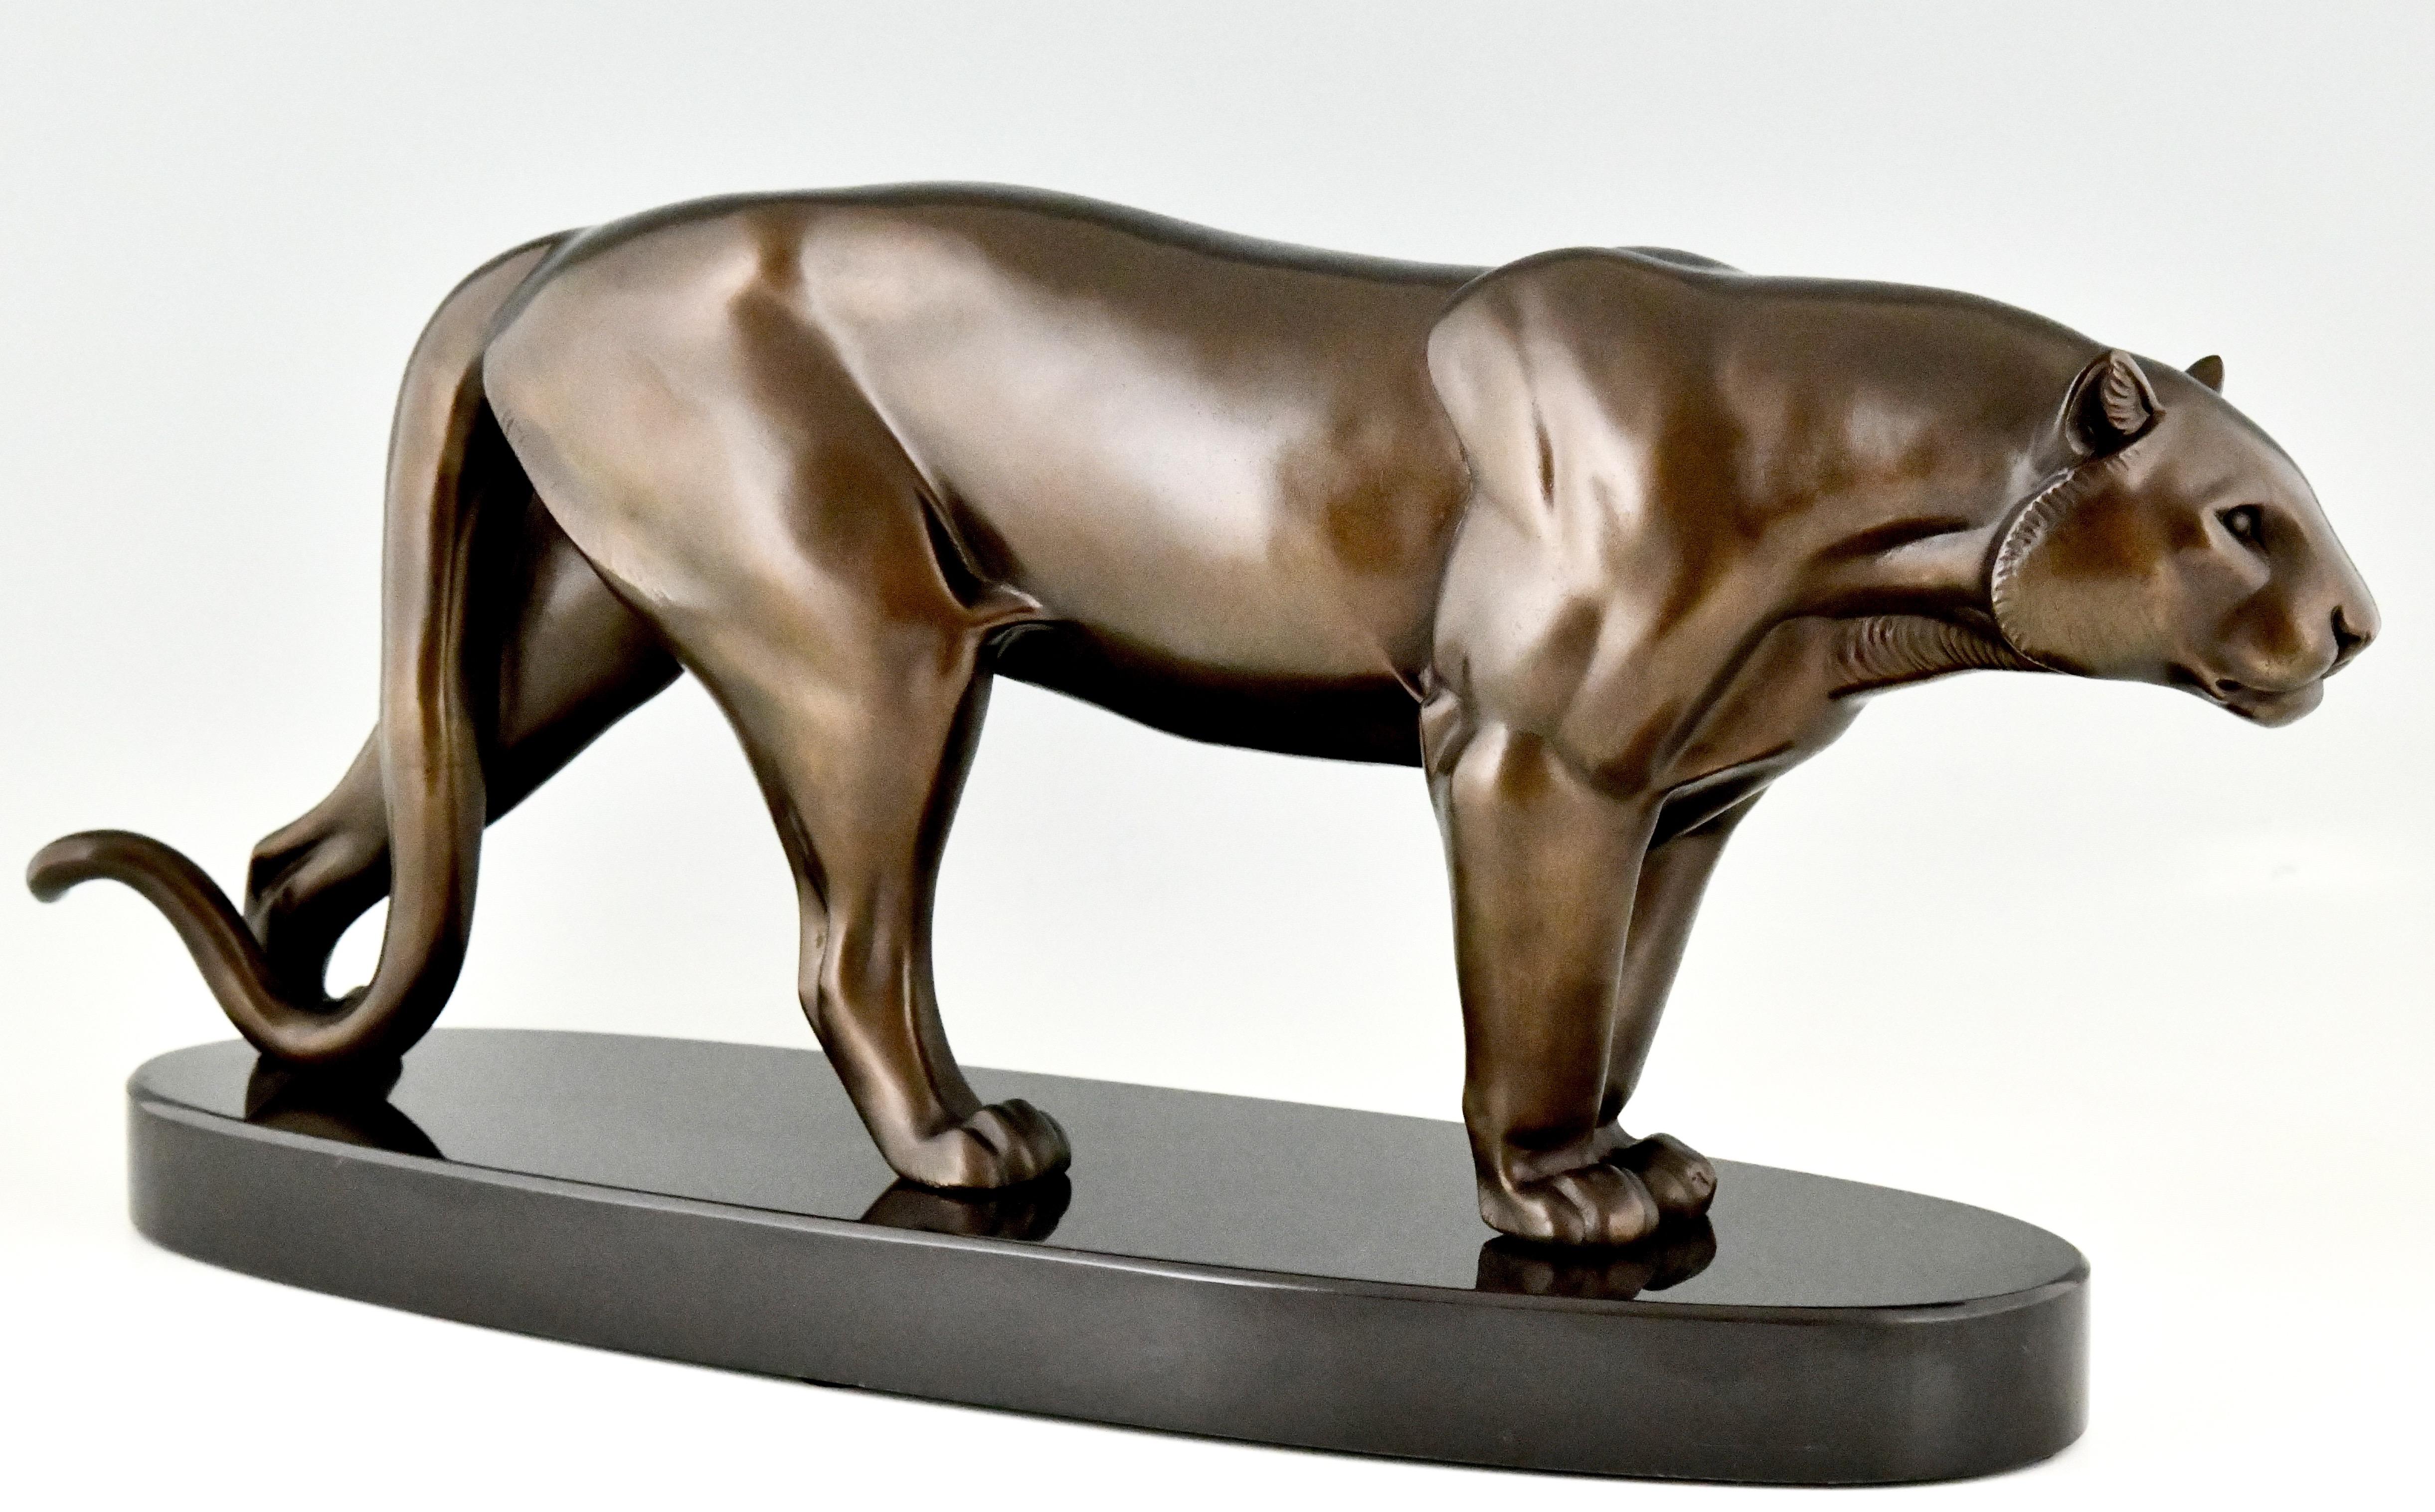 Impressive Art Deco sculpture of a panther signed Rulas, a sculptor who worked in France ca. 1920-1930. Patinated metal on a Belgian Black oval base.